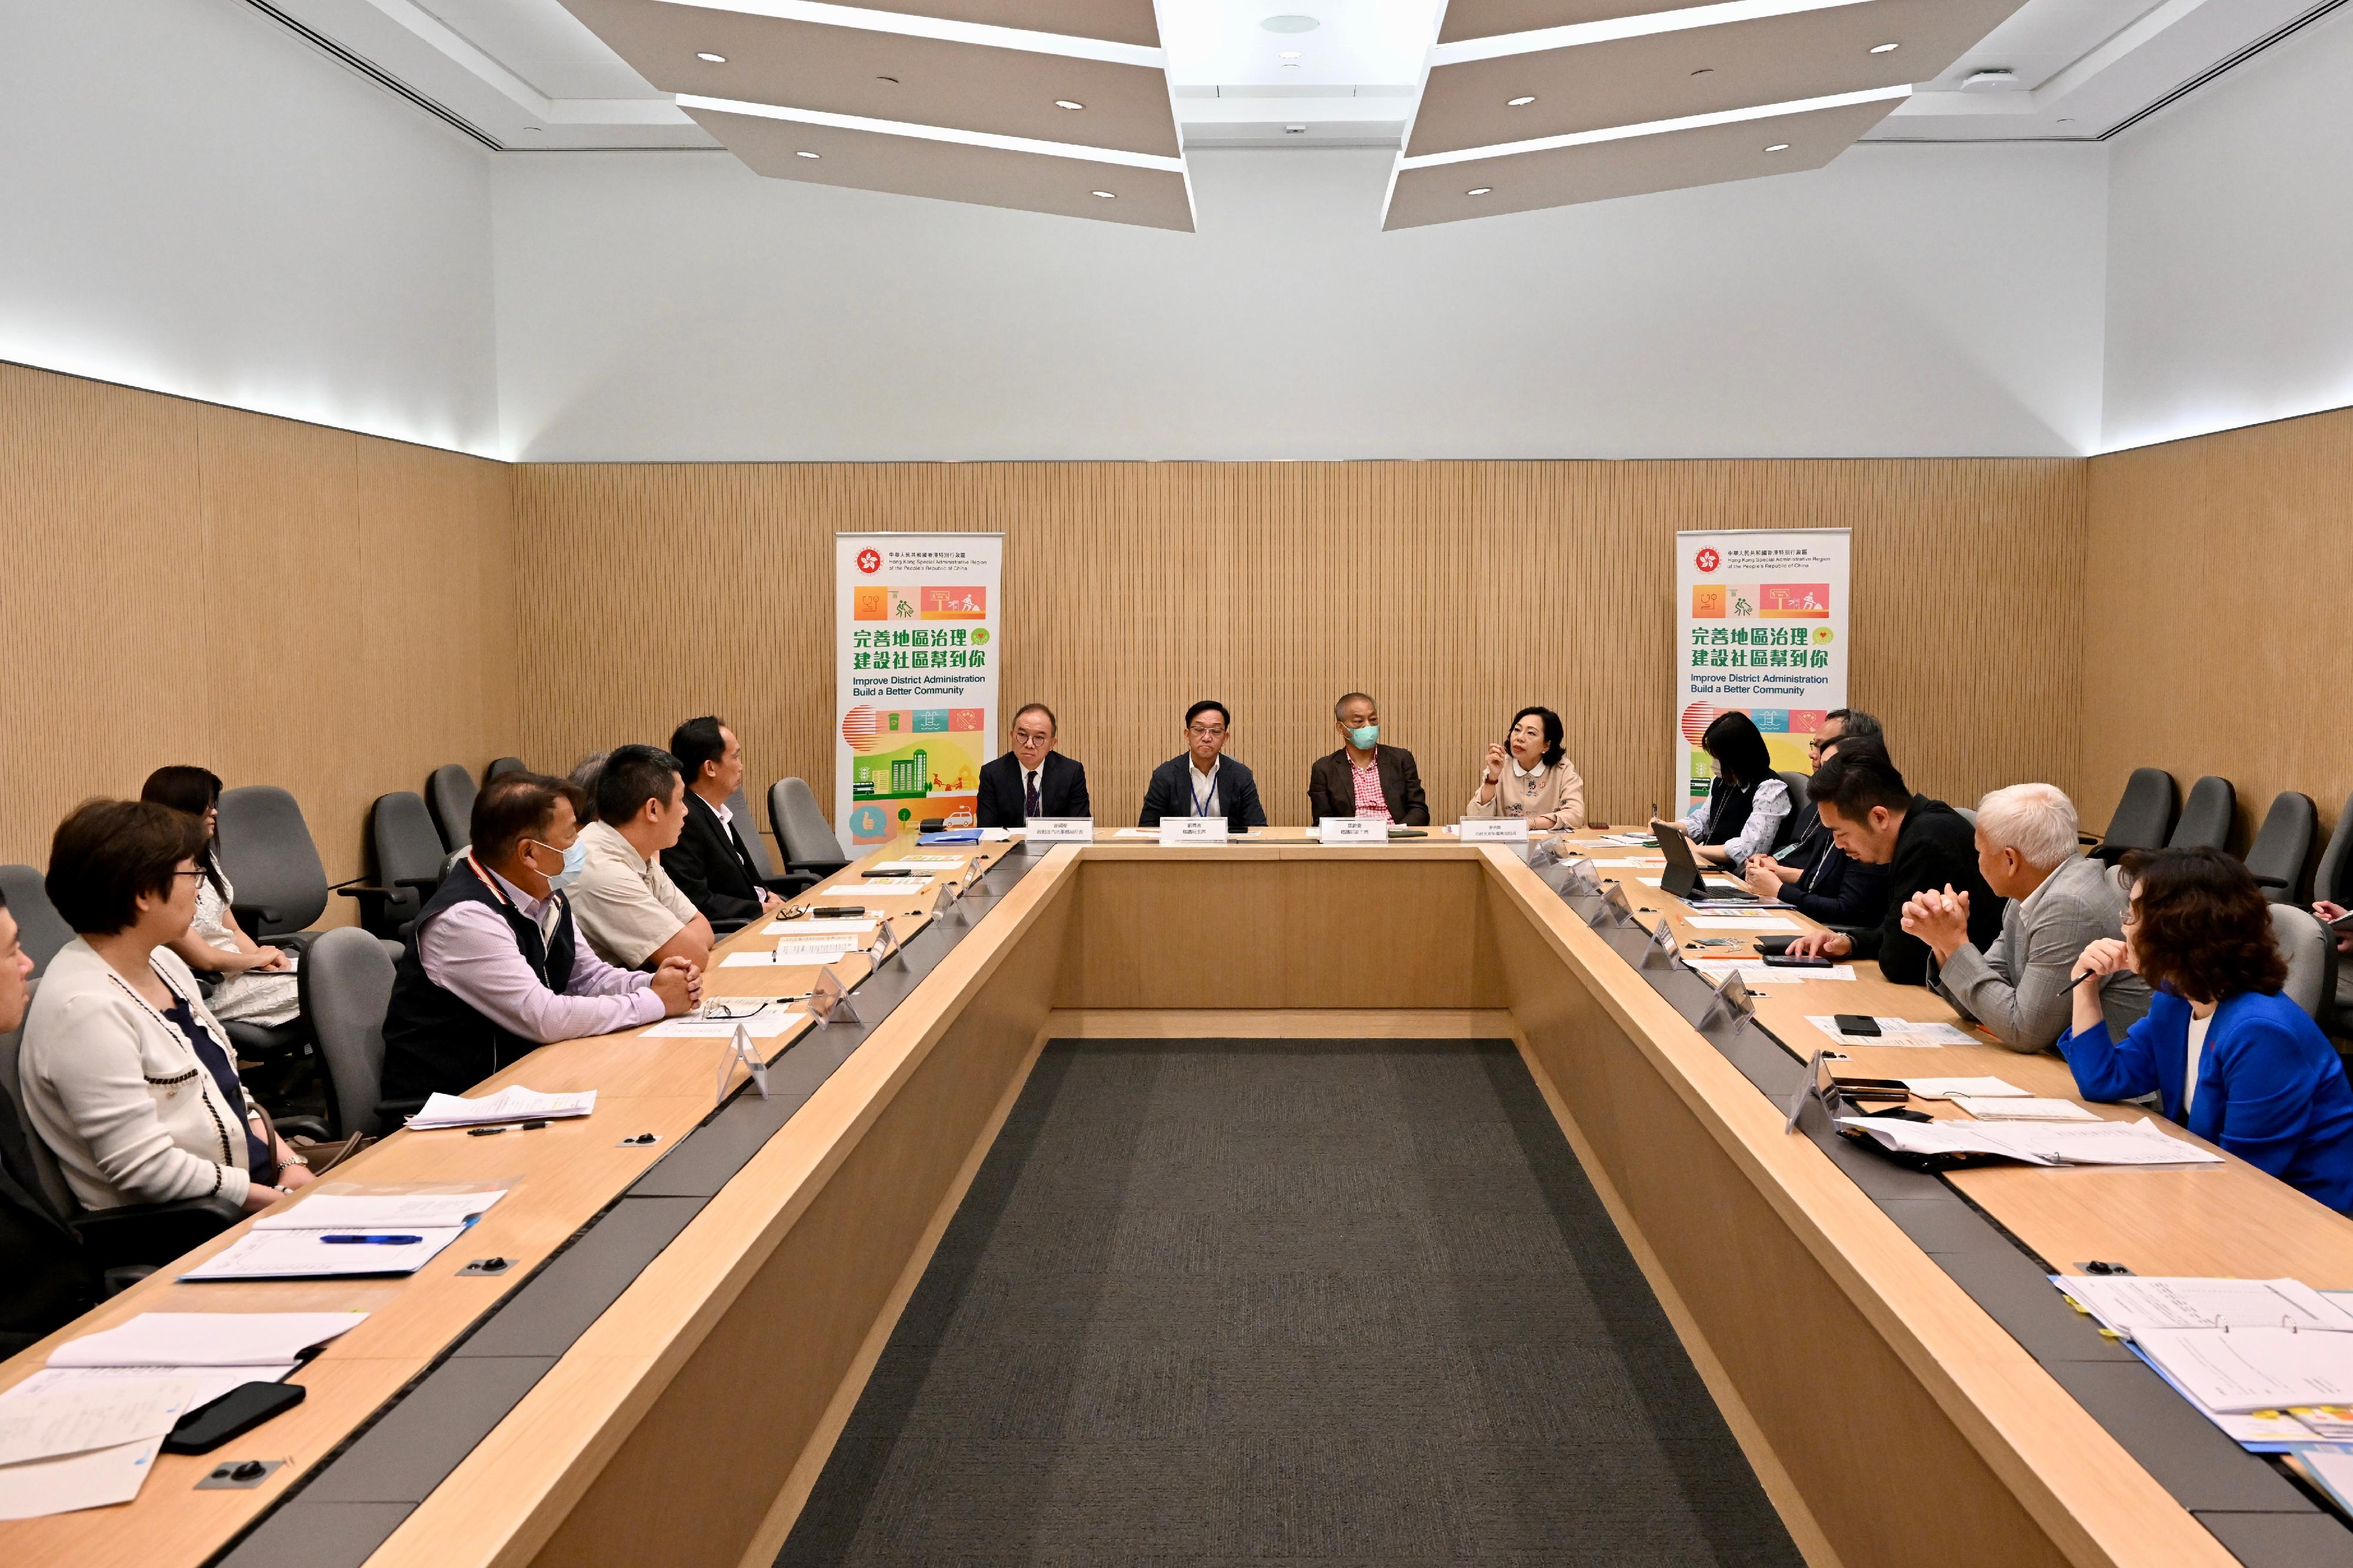 The Secretary for Constitutional and Mainland Affairs, Mr Erick Tsang Kwok-wai (10th right), and the Secretary for Home and Youth Affairs, Miss Alice Mak (seventh right), today (May 19) brief representatives of Heung Yee Kuk New Territories on the proposals to improve governance at the district level.